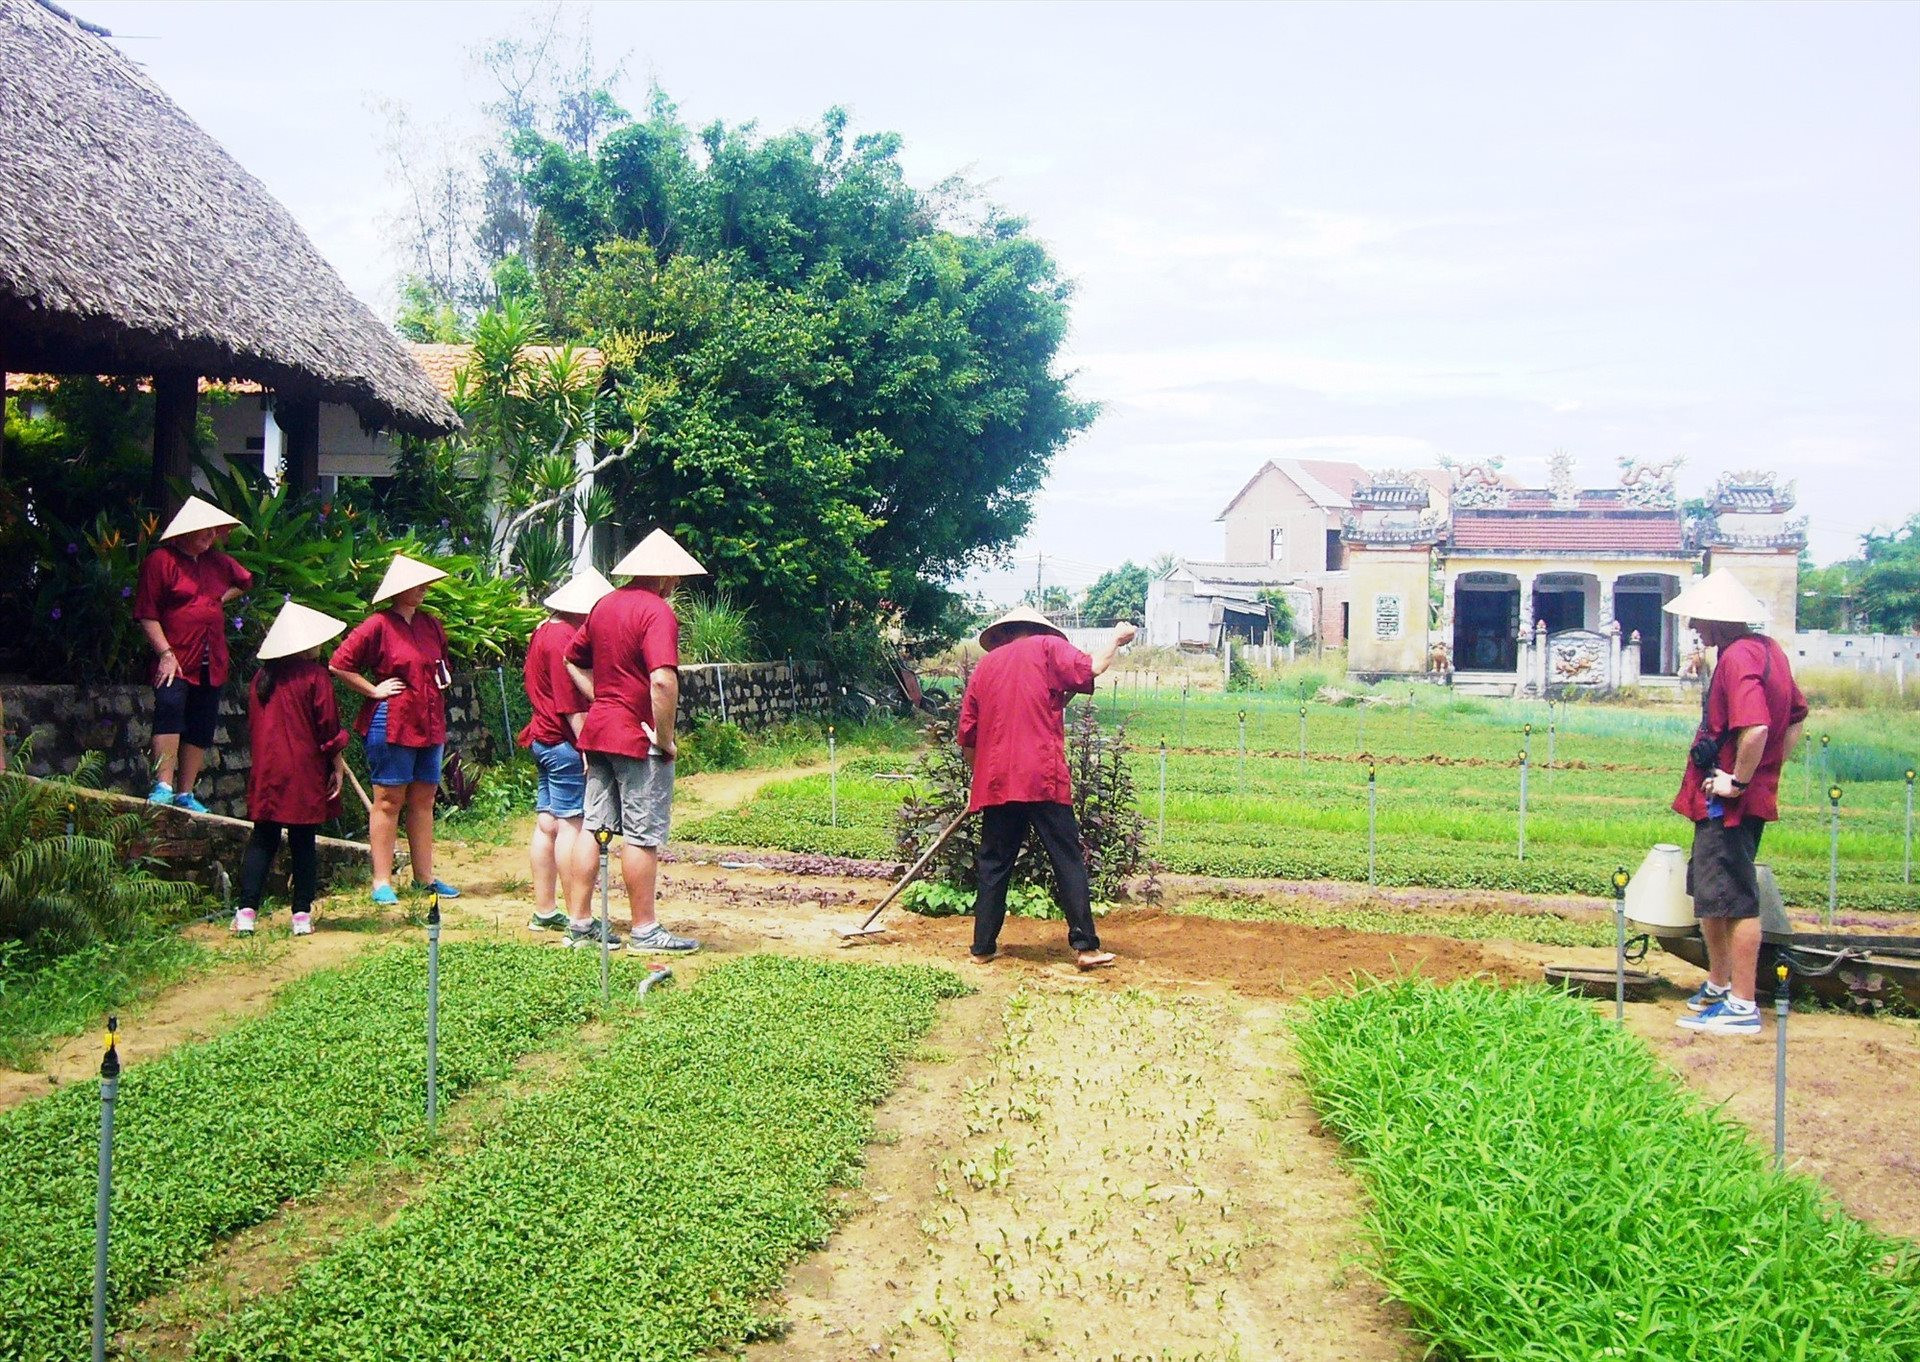 Agritourism in Hoi An